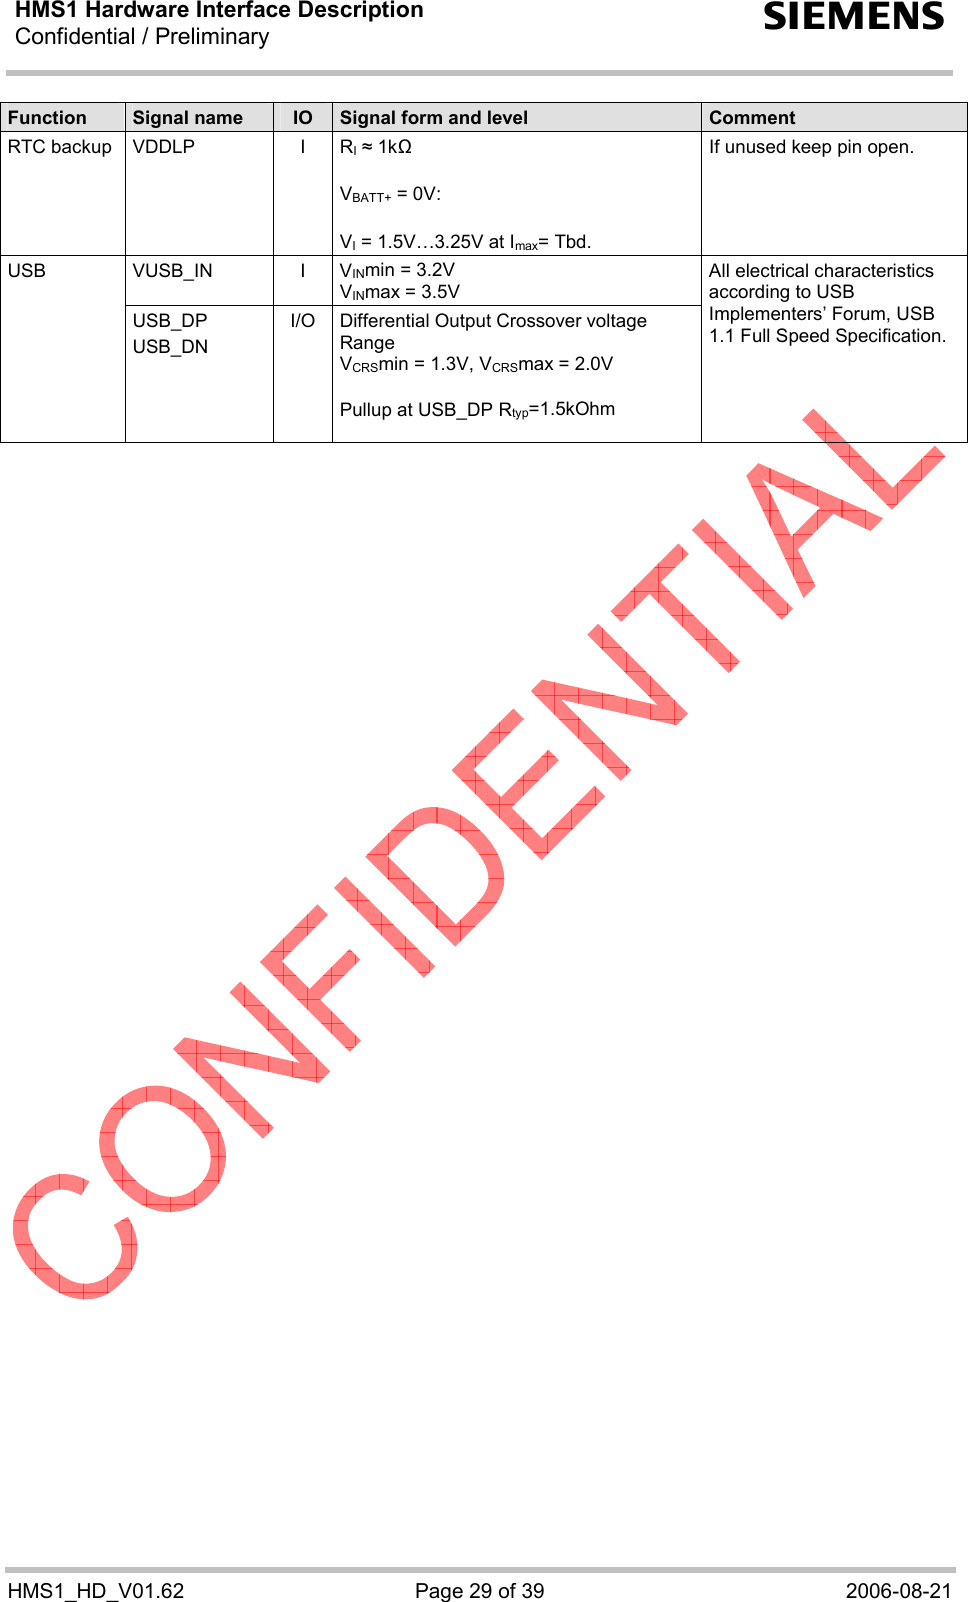 HMS1 Hardware Interface Description Confidential / Preliminary  s HMS1_HD_V01.62  Page 29 of 39  2006-08-21 Function  Signal name  IO  Signal form and level  Comment RTC backup  VDDLP  I   RI ≈ 1kΩ   VBATT+ = 0V:  VI = 1.5V…3.25V at Imax= Tbd.  If unused keep pin open. VUSB_IN I VINmin = 3.2V  VINmax = 3.5V  USB USB_DP  USB_DN I/O  Differential Output Crossover voltage Range  VCRSmin = 1.3V, VCRSmax = 2.0V  Pullup at USB_DP Rtyp=1.5kOhm   All electrical characteristics according to USB Implementers’ Forum, USB 1.1 Full Speed Specification.   